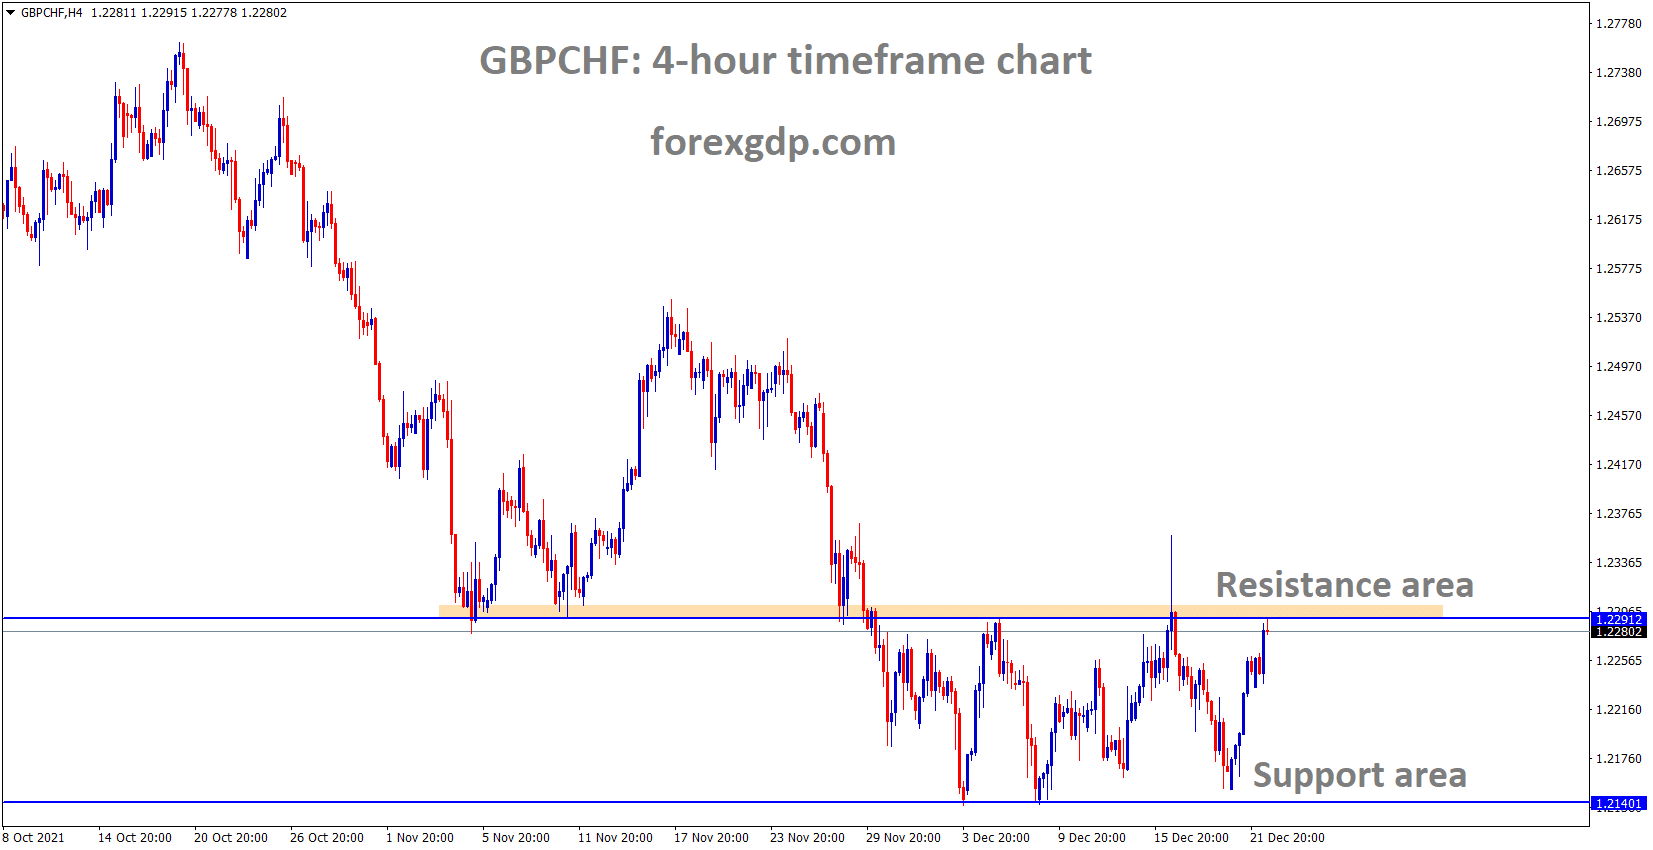 GBPCHF is moving in the Box pattern and the market has reached the Horizontal resistance area.